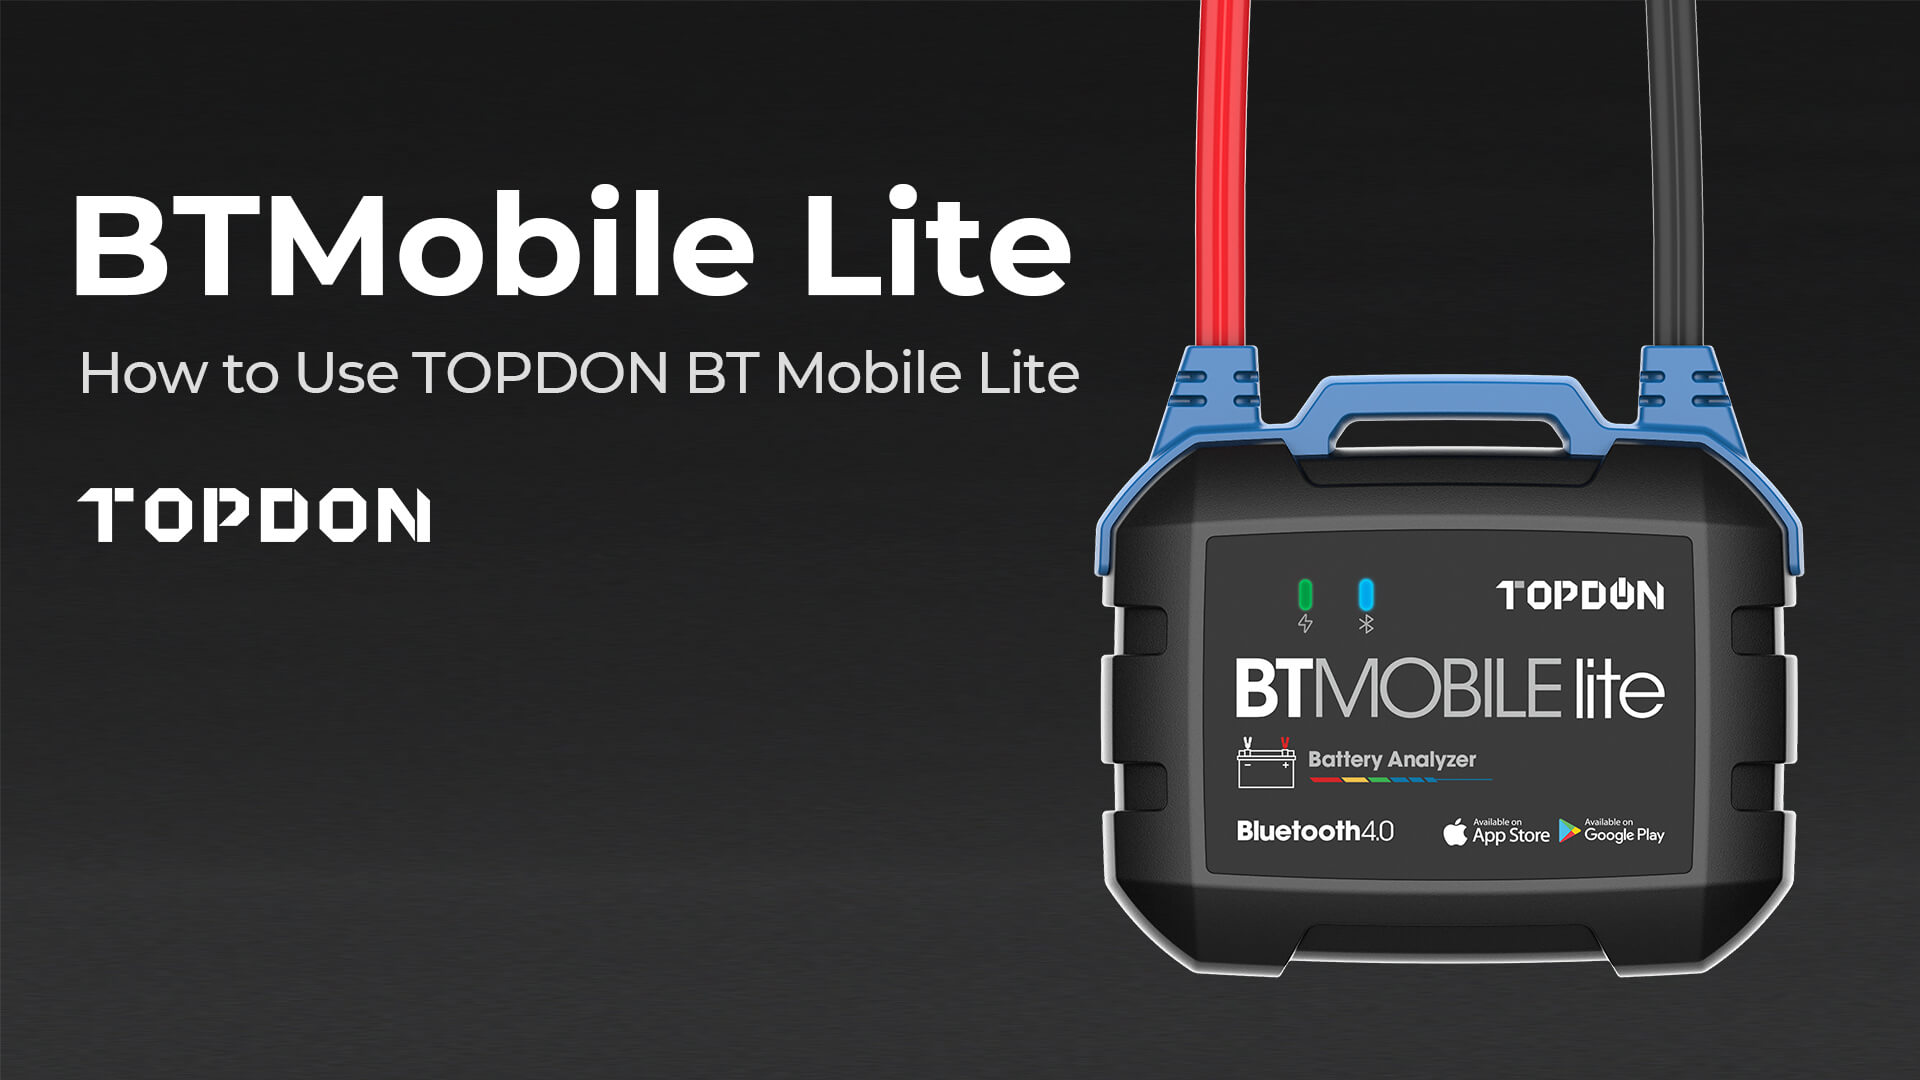 How to Use TOPDON BT Mobile Lite?